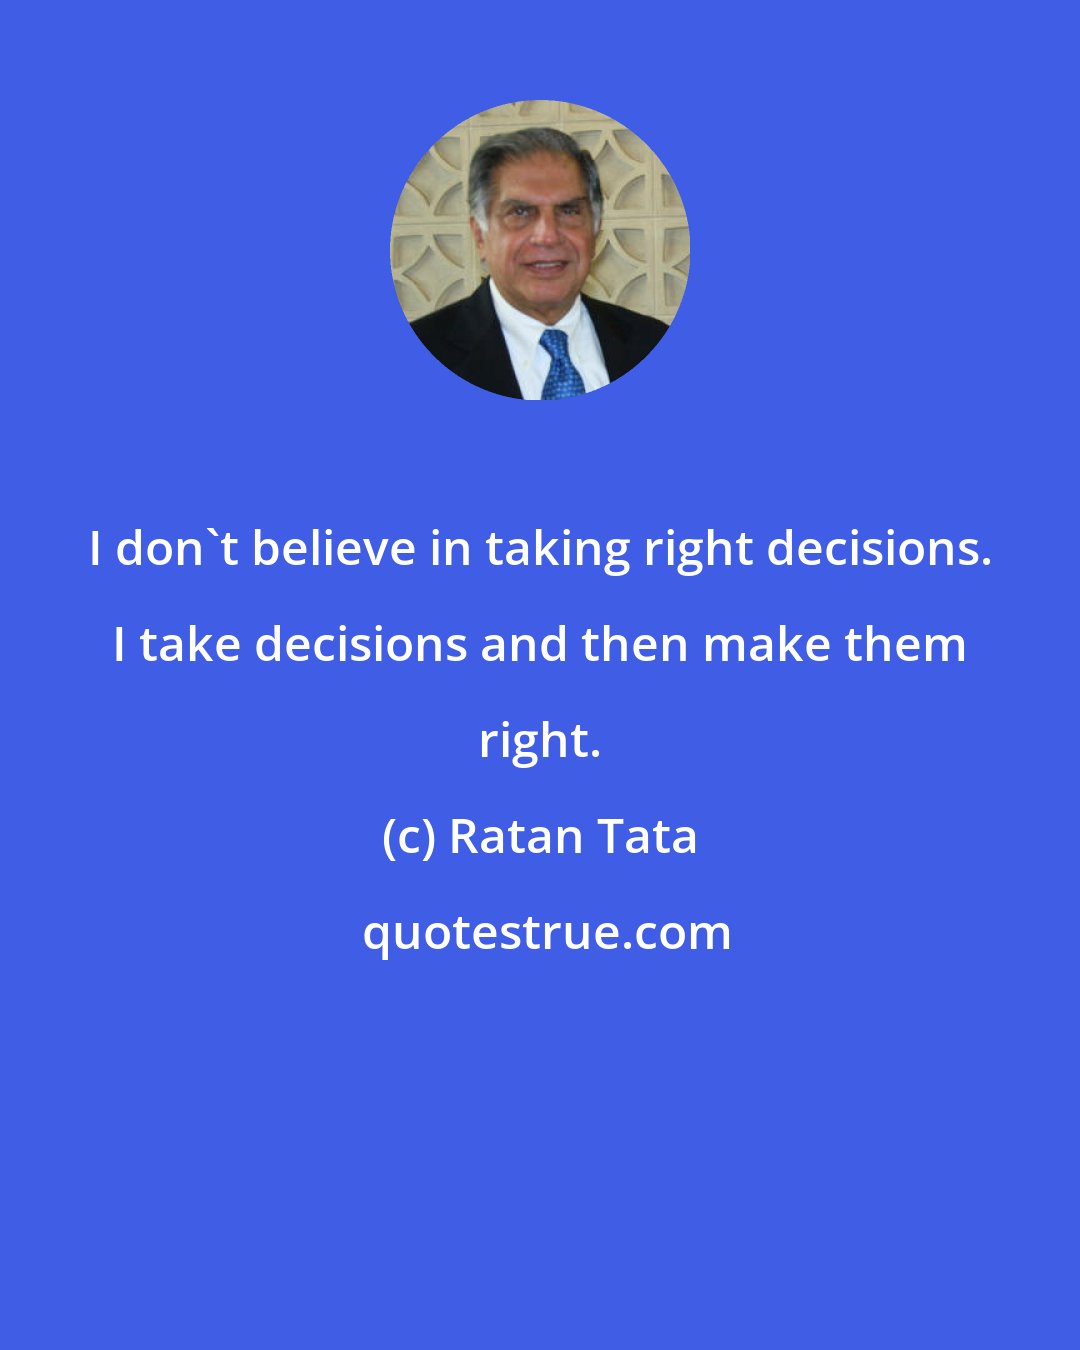 Ratan Tata: I don't believe in taking right decisions. I take decisions and then make them right.